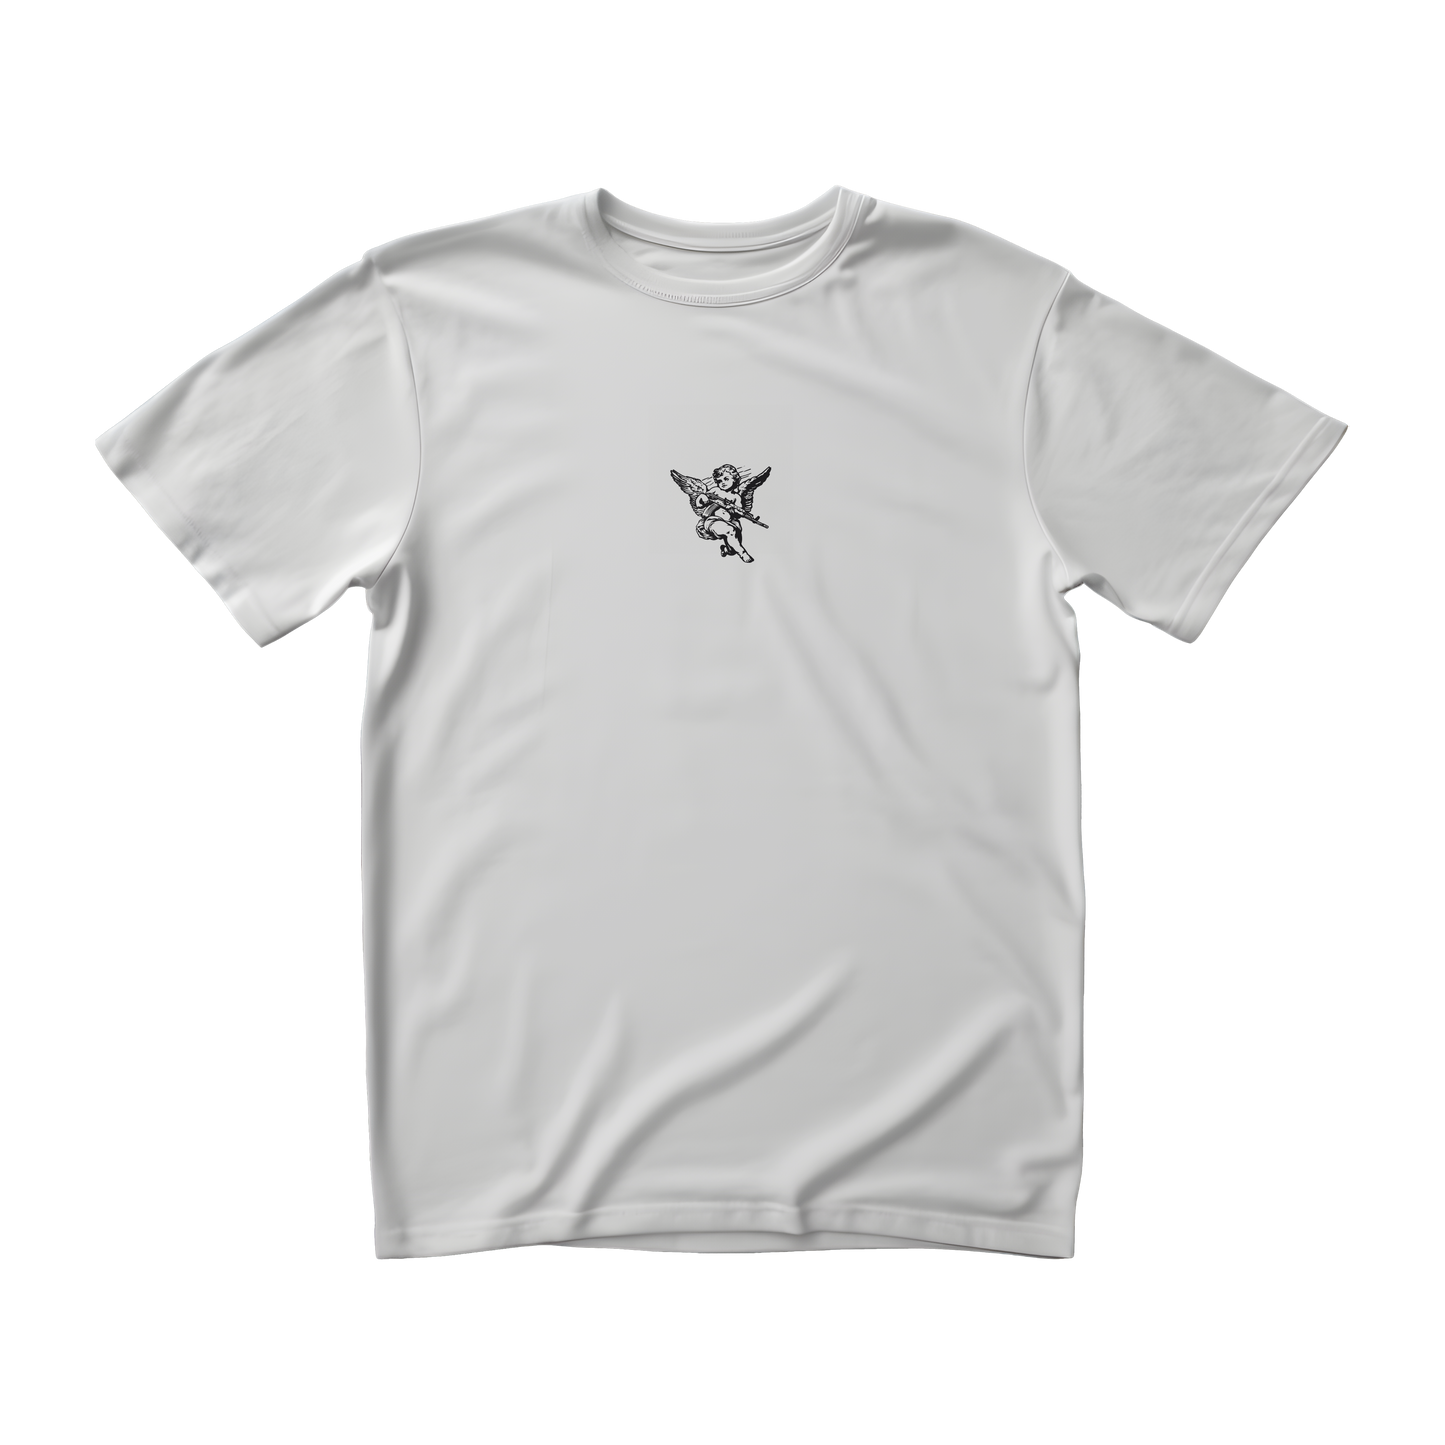 "No Angel Is Pure" Graphic Tee - White